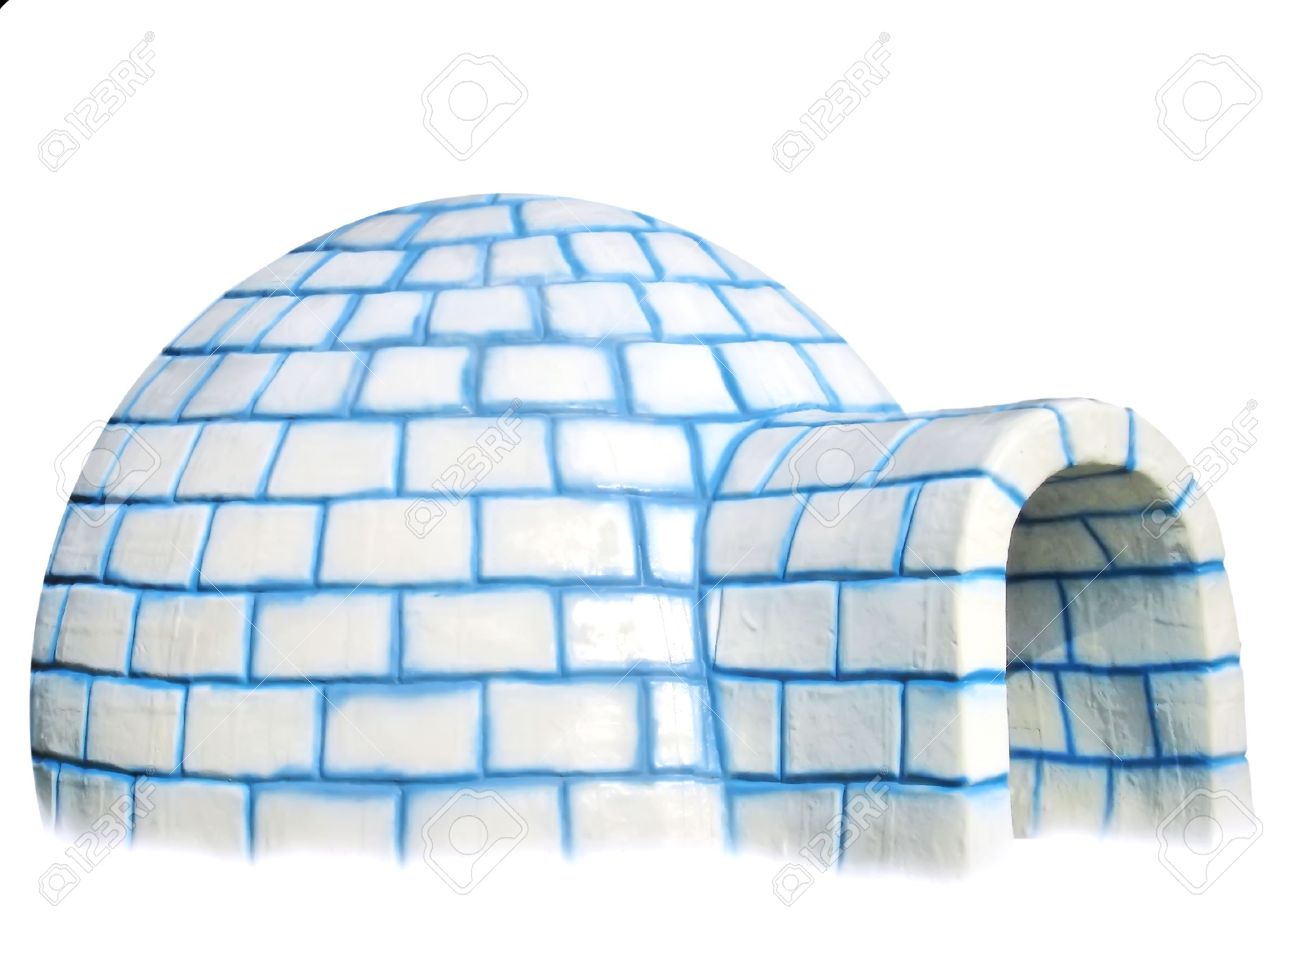 Igloo Isolated On White Background Stock Photo Picture And